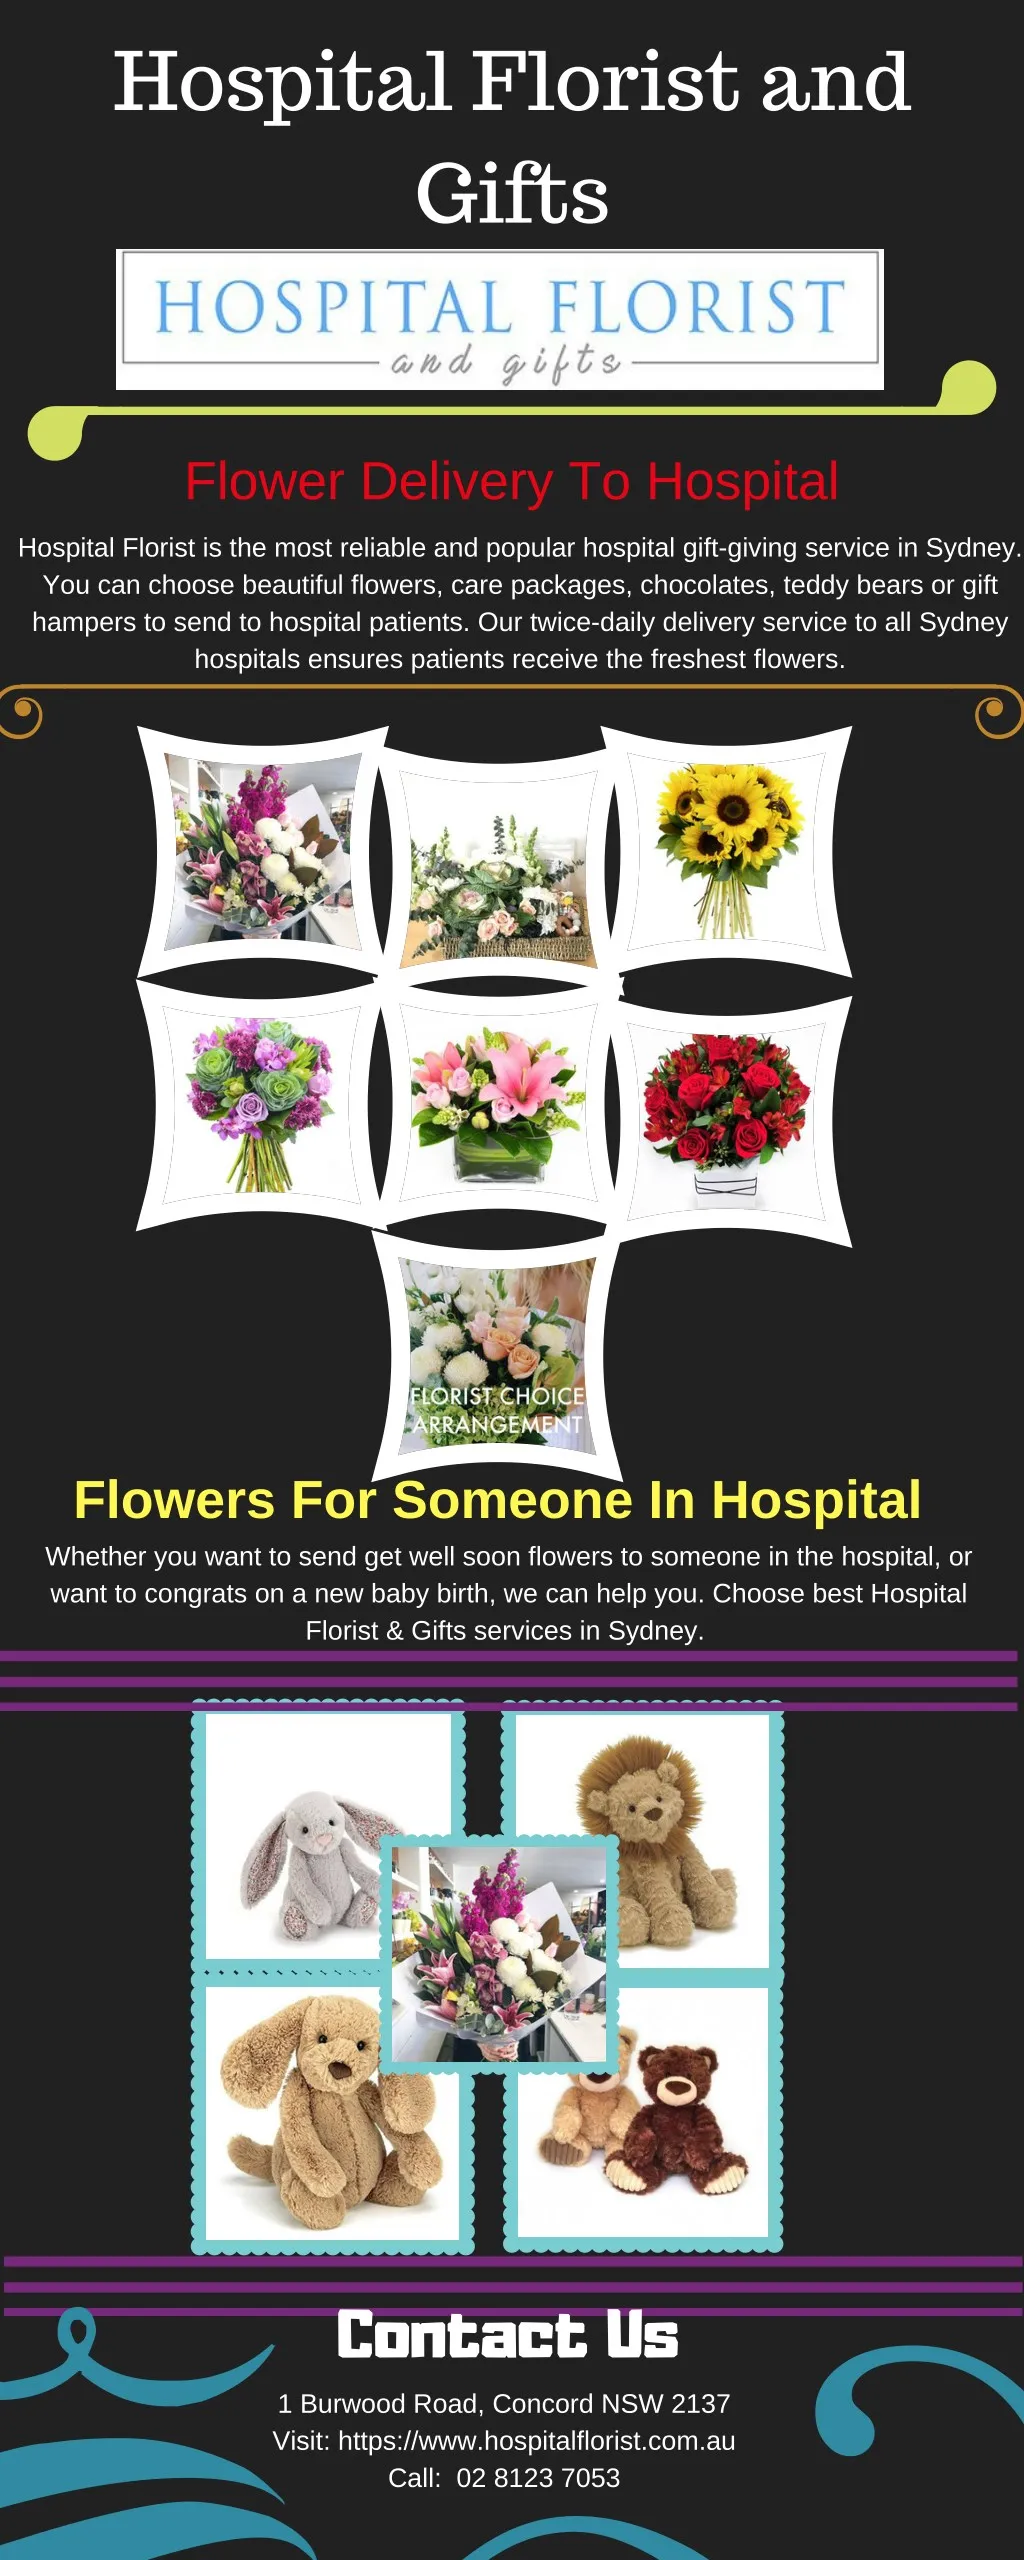 hospital florist and gifts